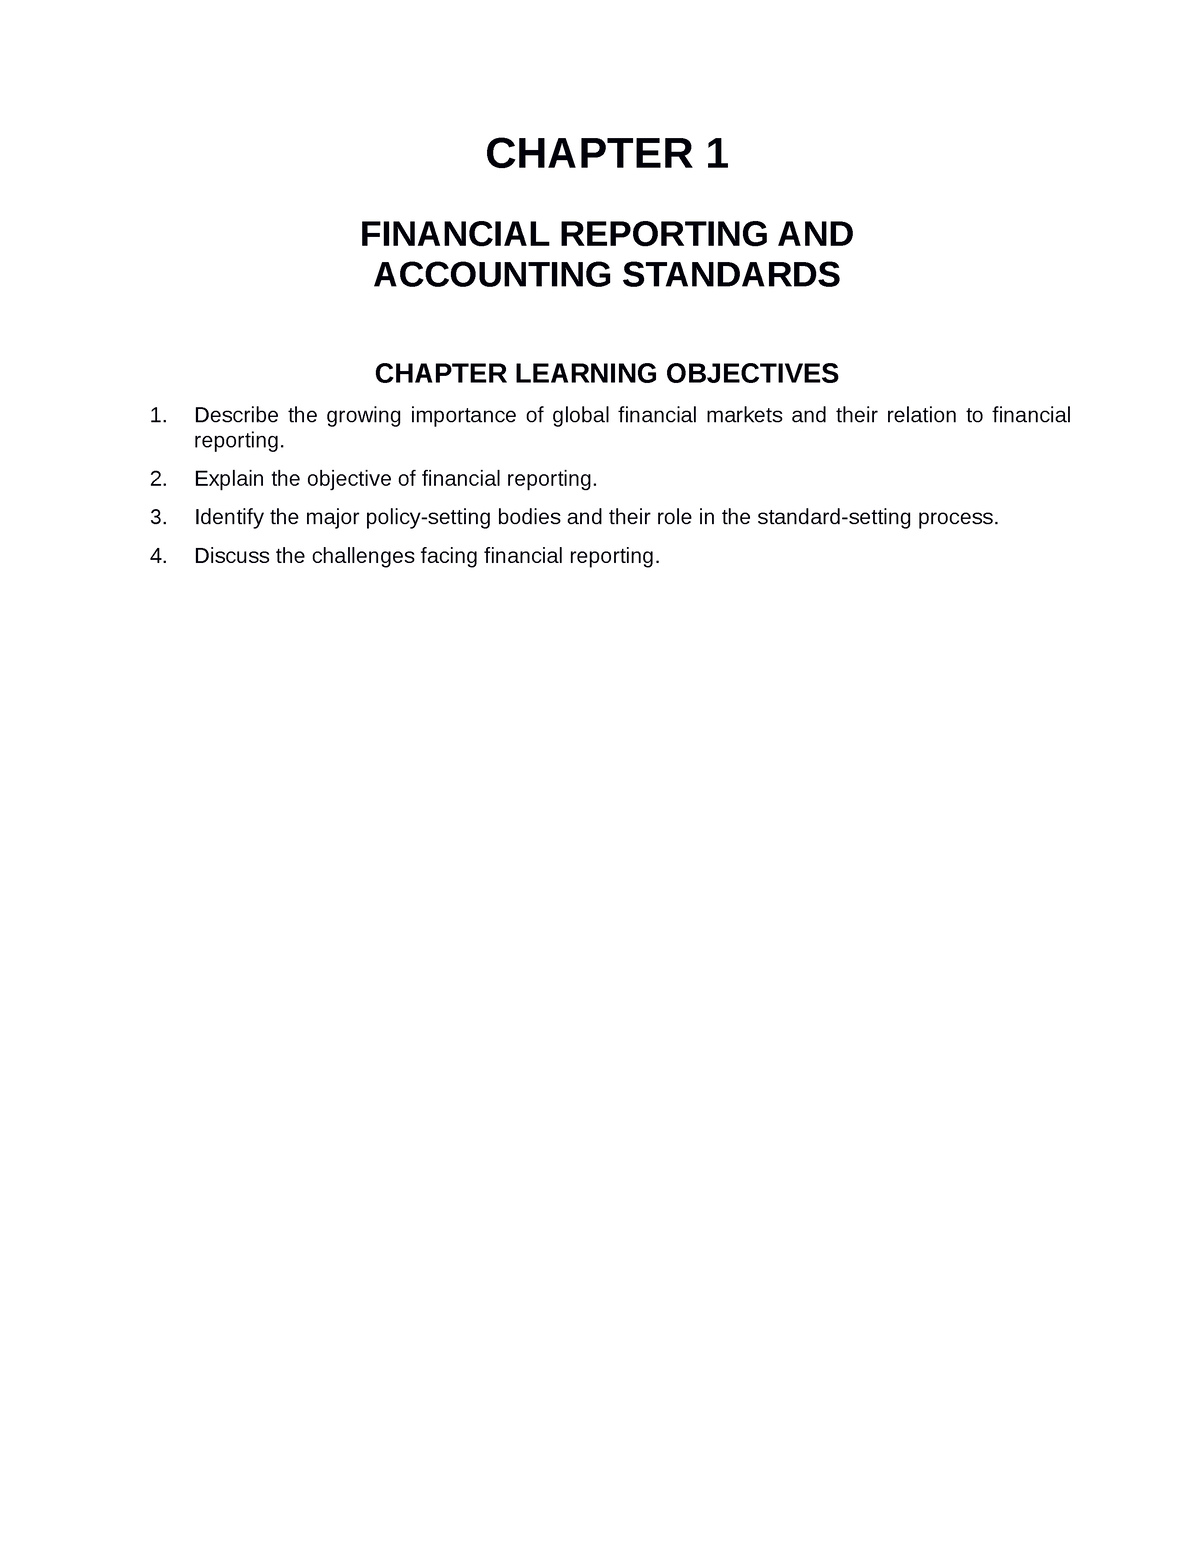 Ch01 - test bank for conceptual frameworks - CHAPTER 1 FINANCIAL ...